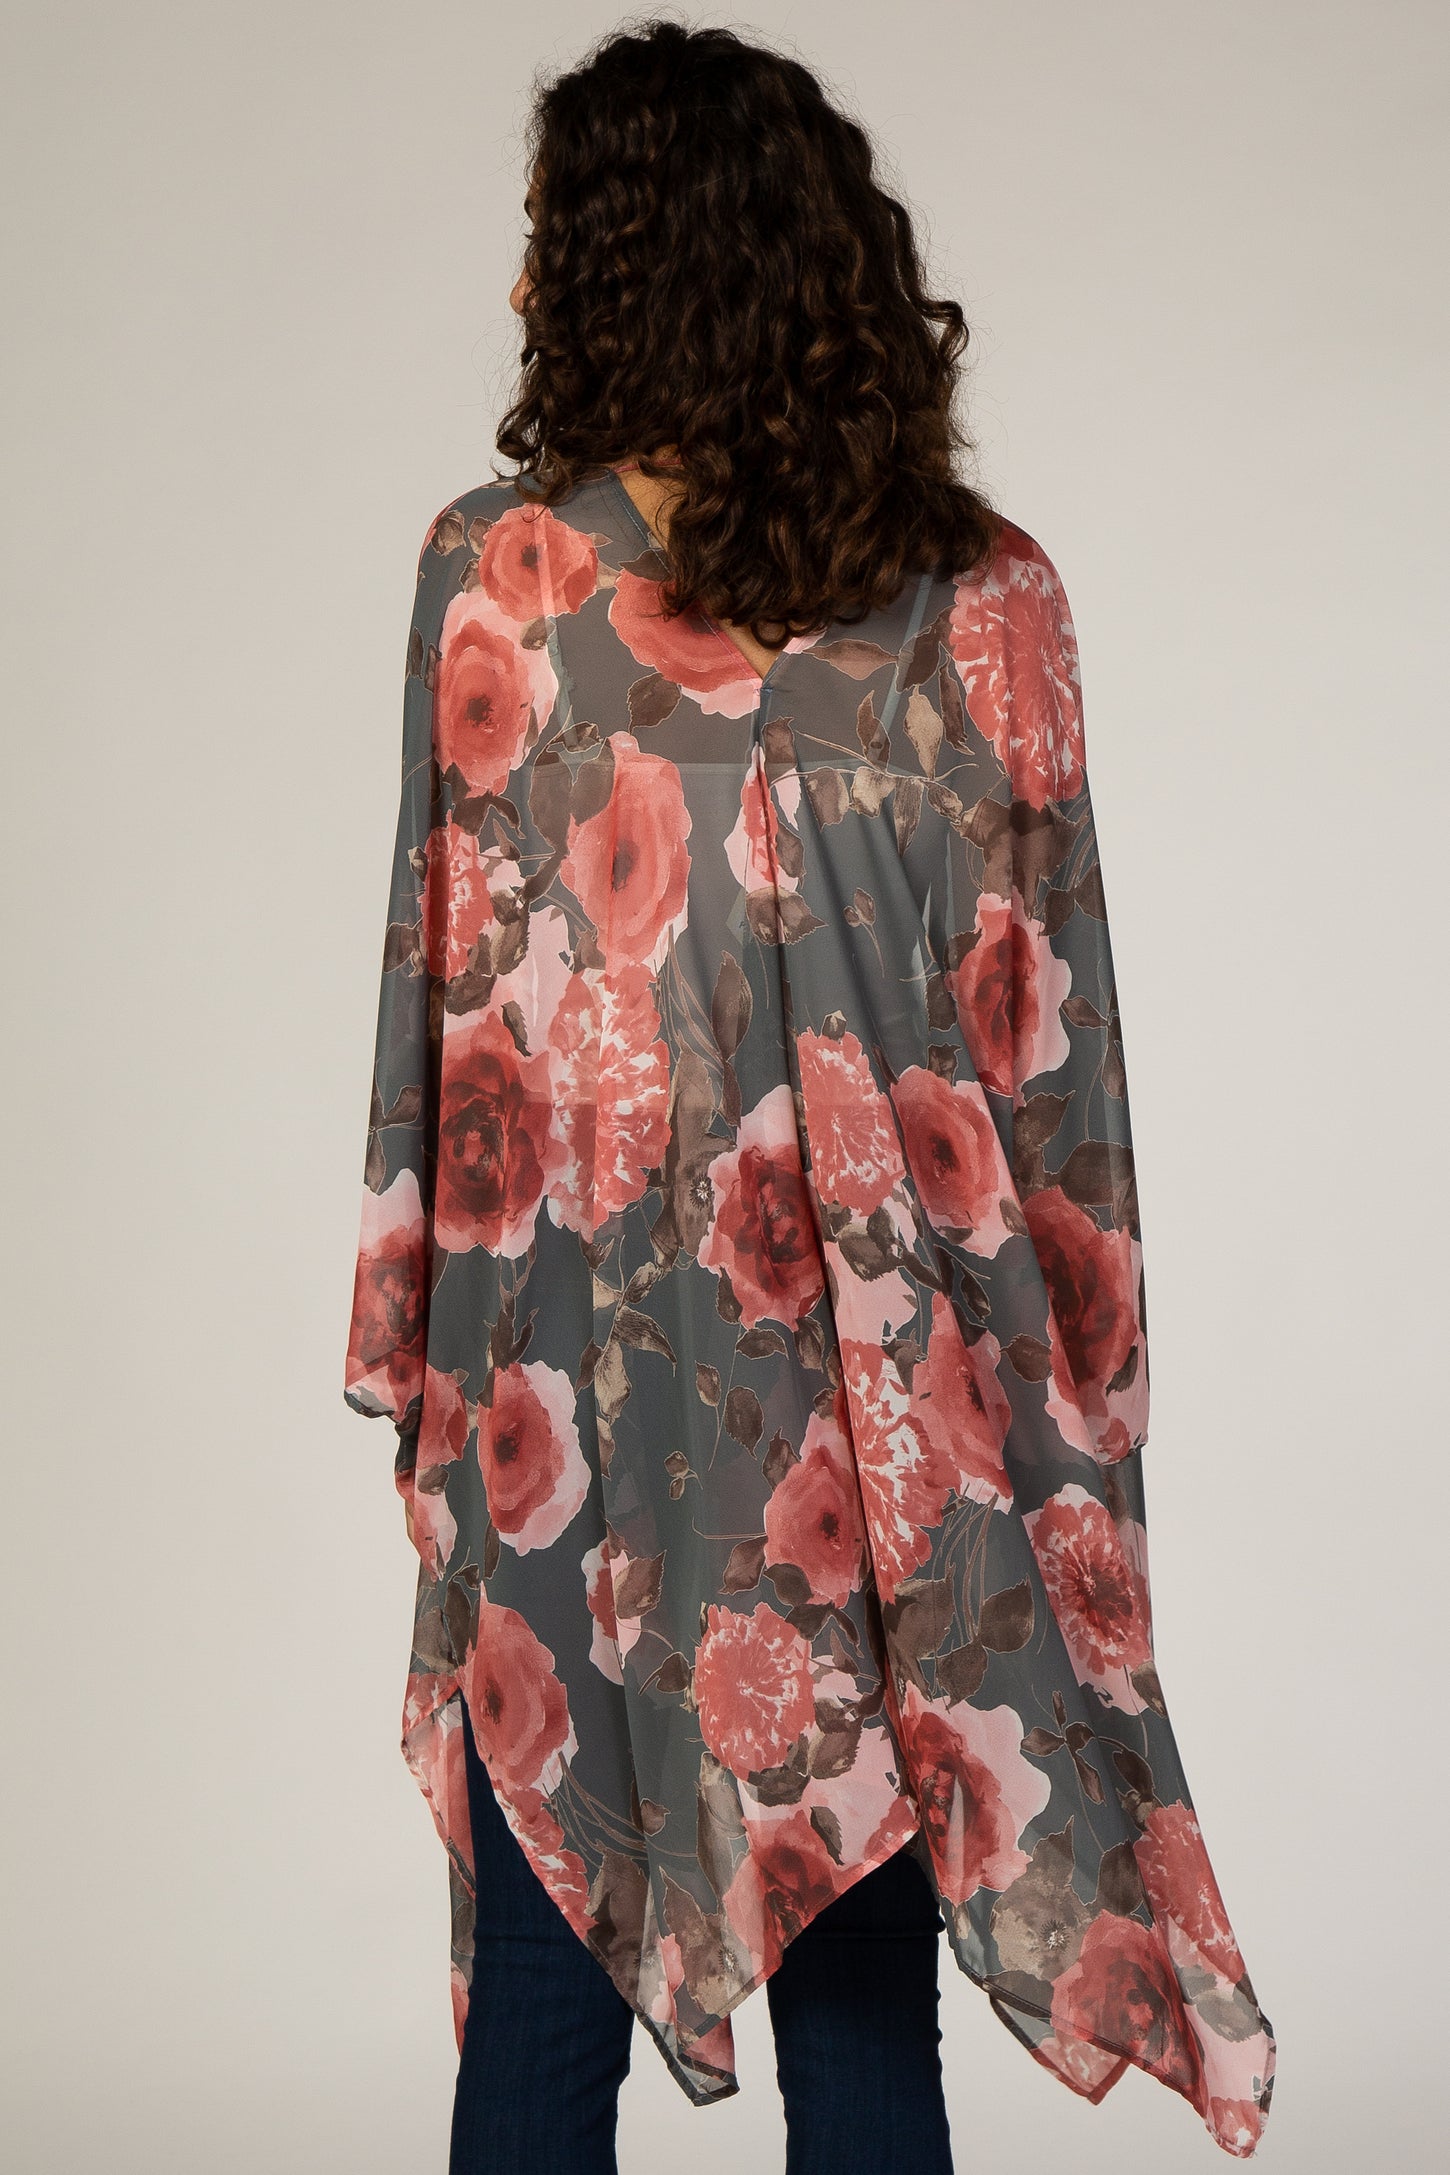 PinkBlush Grey Floral Chiffon Open Front Cover Up